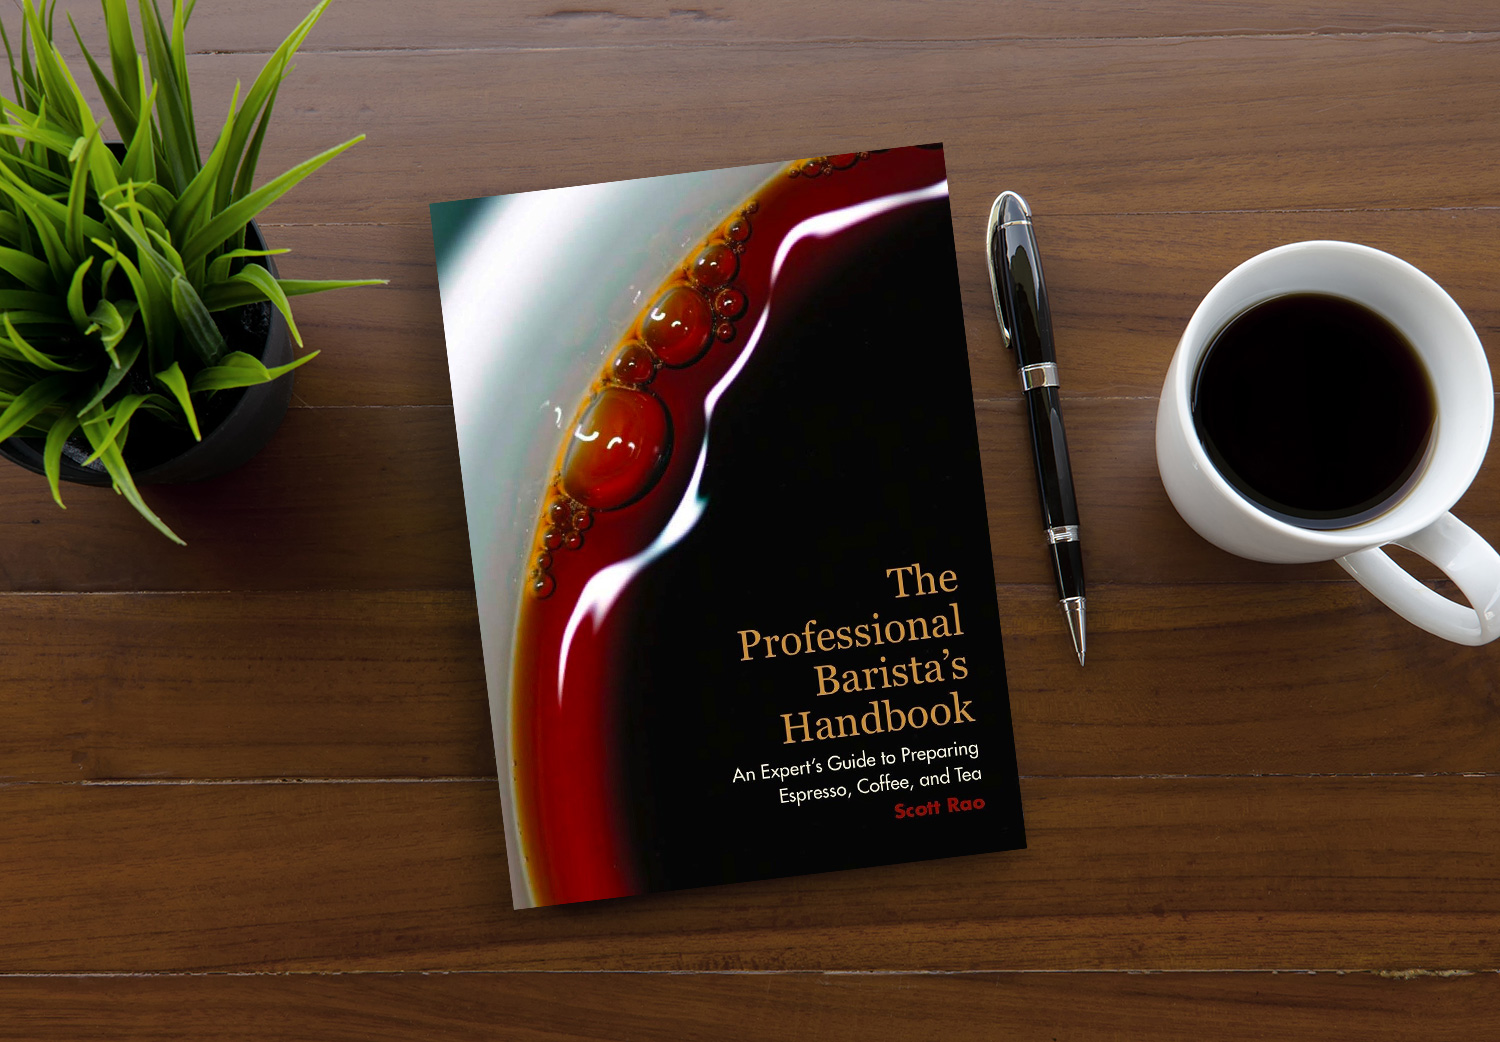 The Professional Barista's Handbook by Scott Rao on a wooden table.